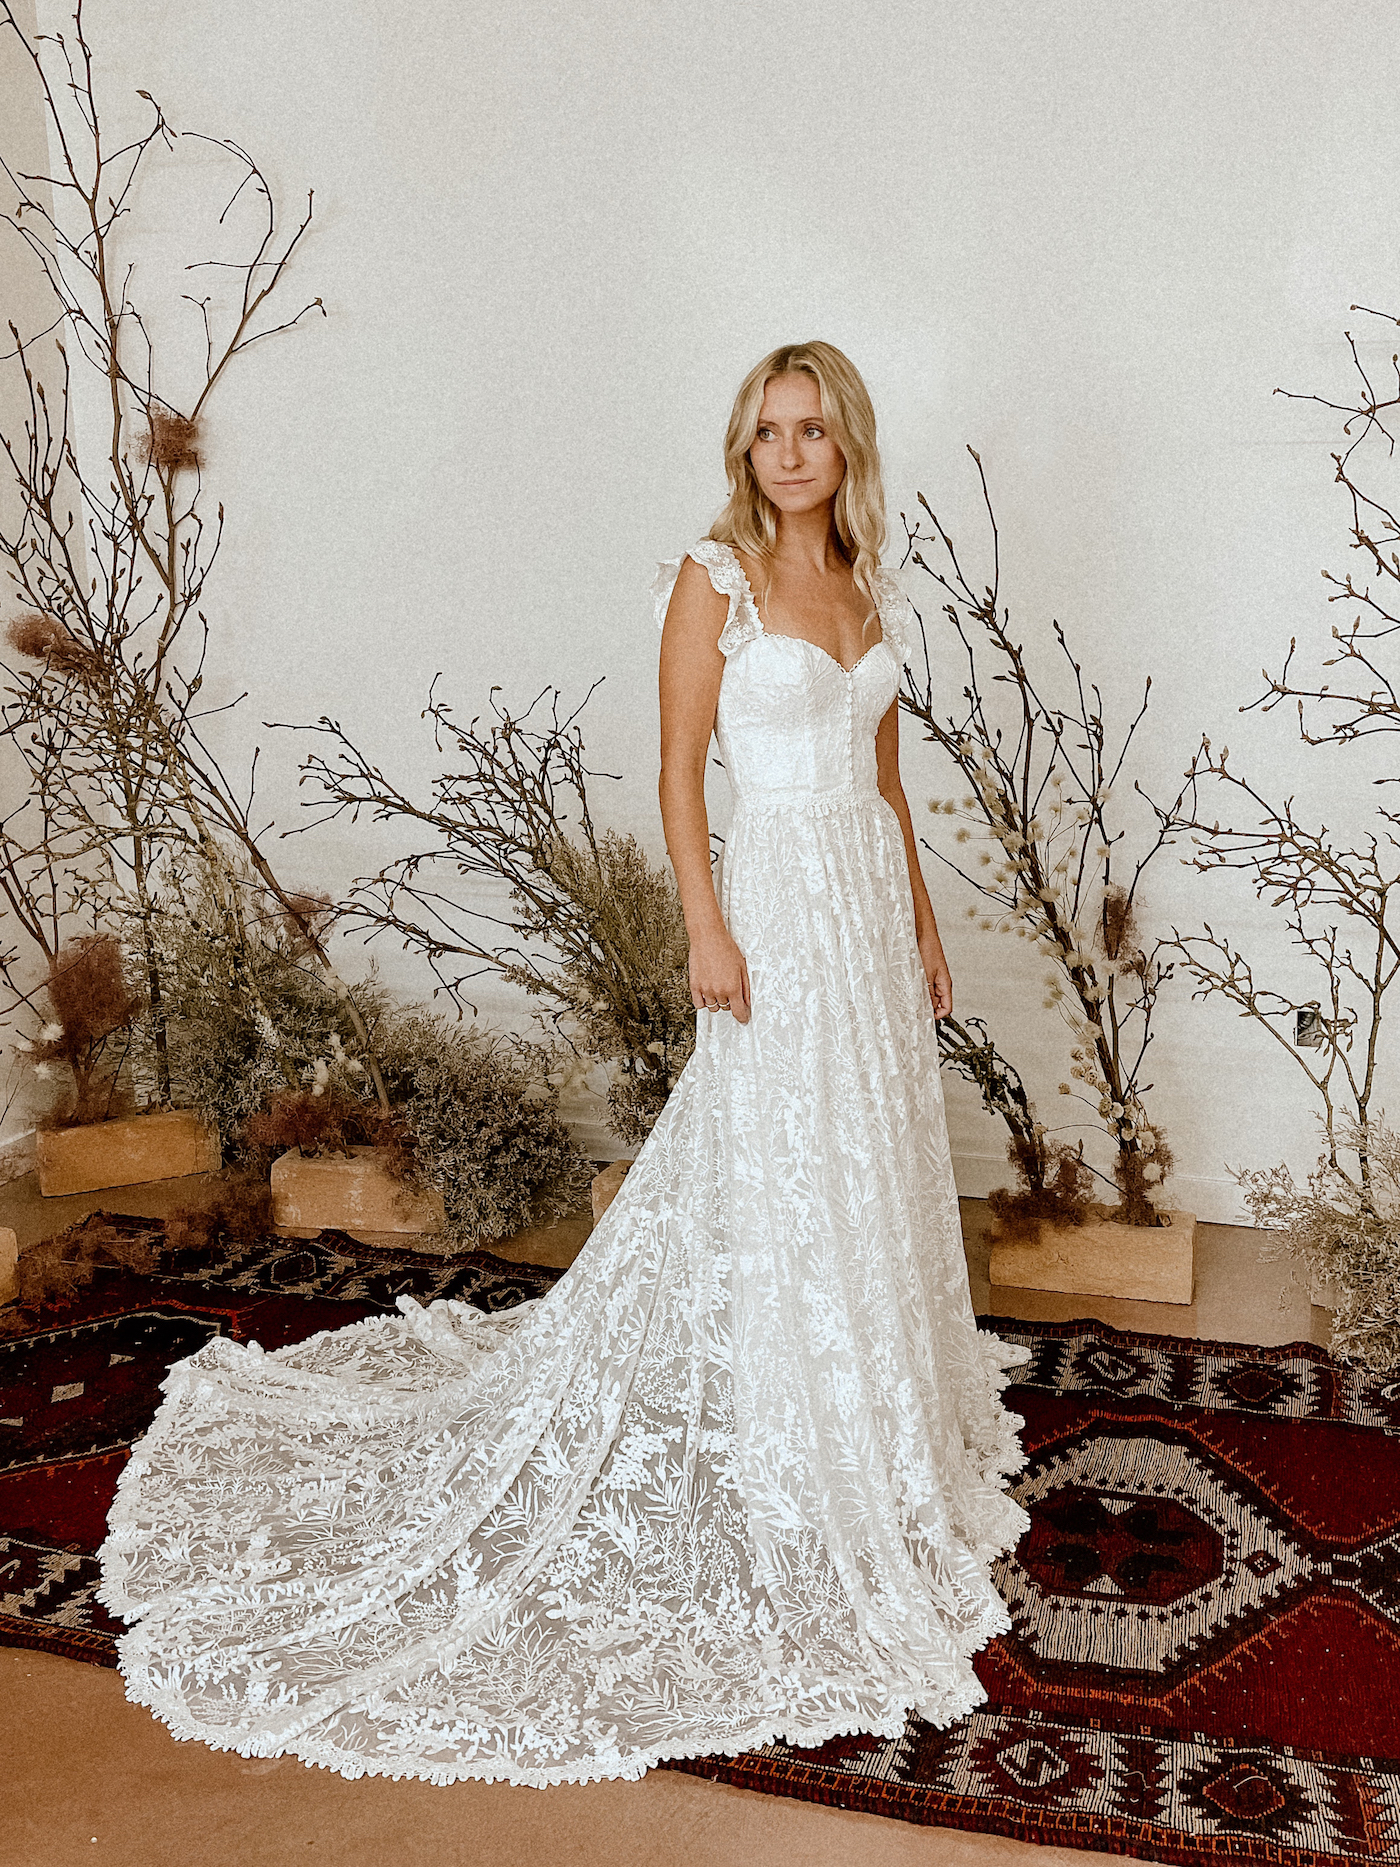 Lace Wedding Dresses: 49 Beautiful Picks to Suit All Brides - hitched.co.uk